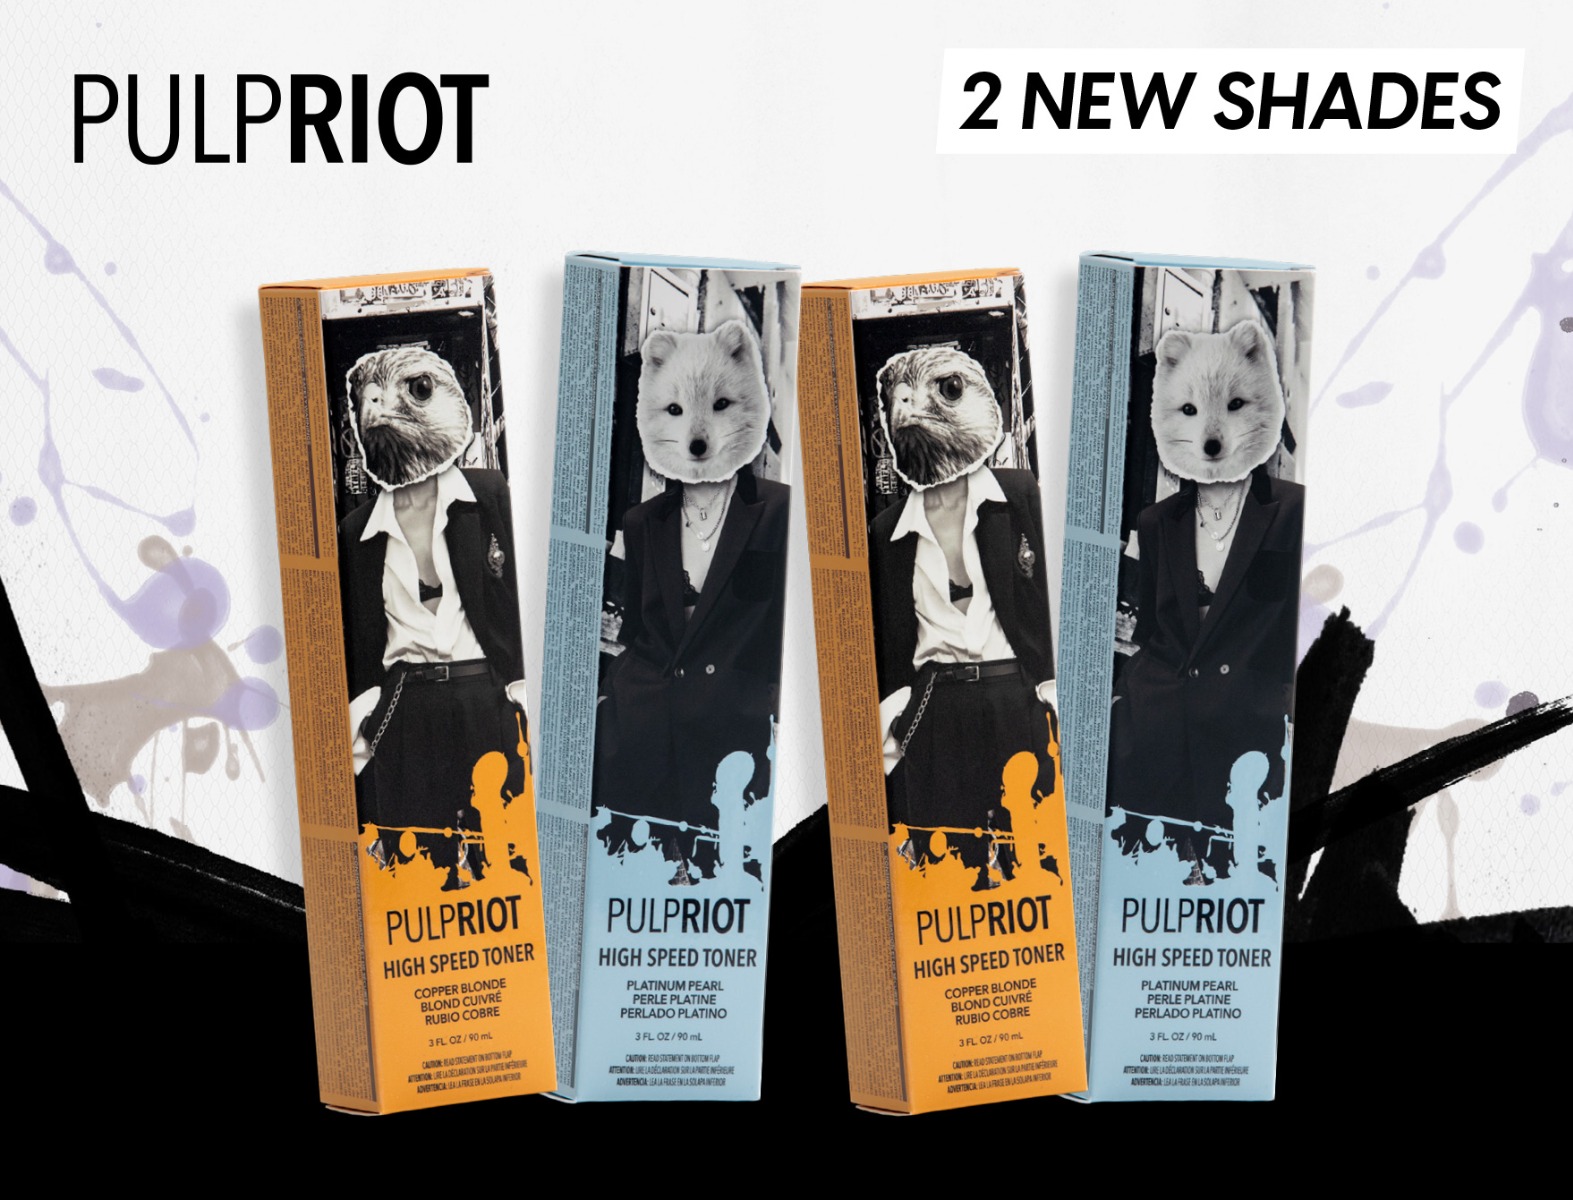 2 NEW Pulp Riot High Speed Toners!